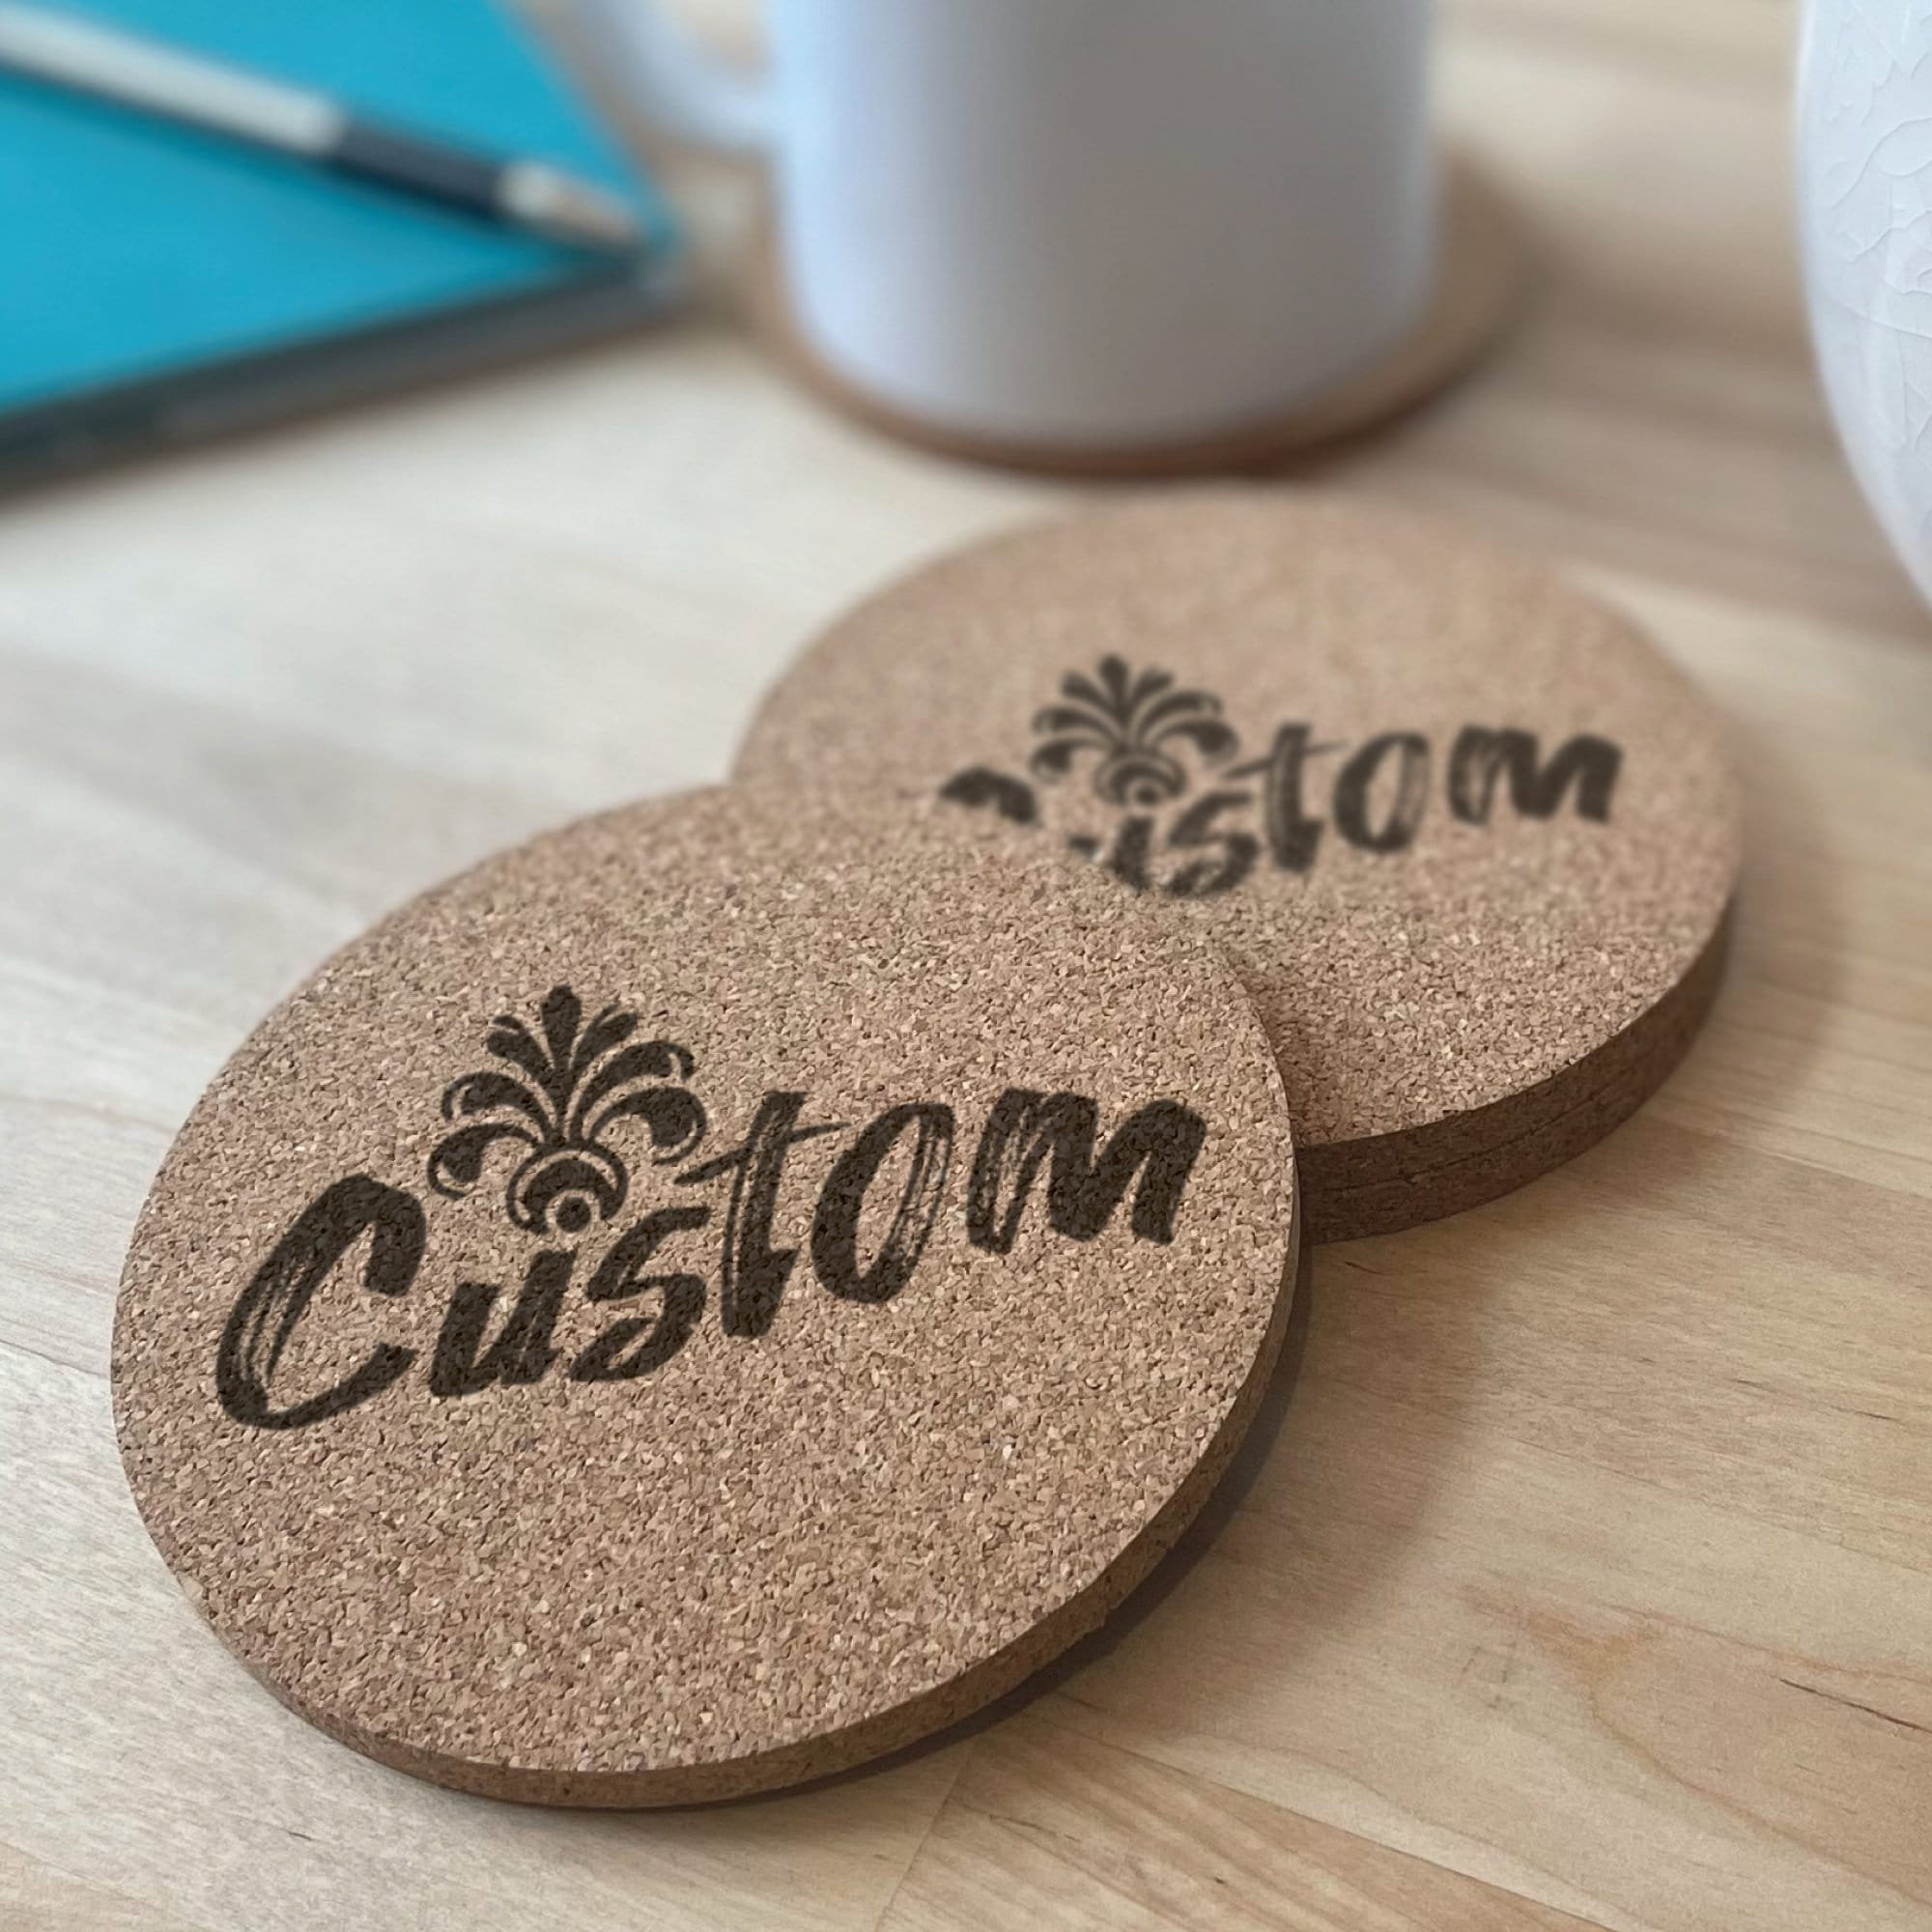 Custom Printed Cork Coasters (Round or Square) - From $0.40!